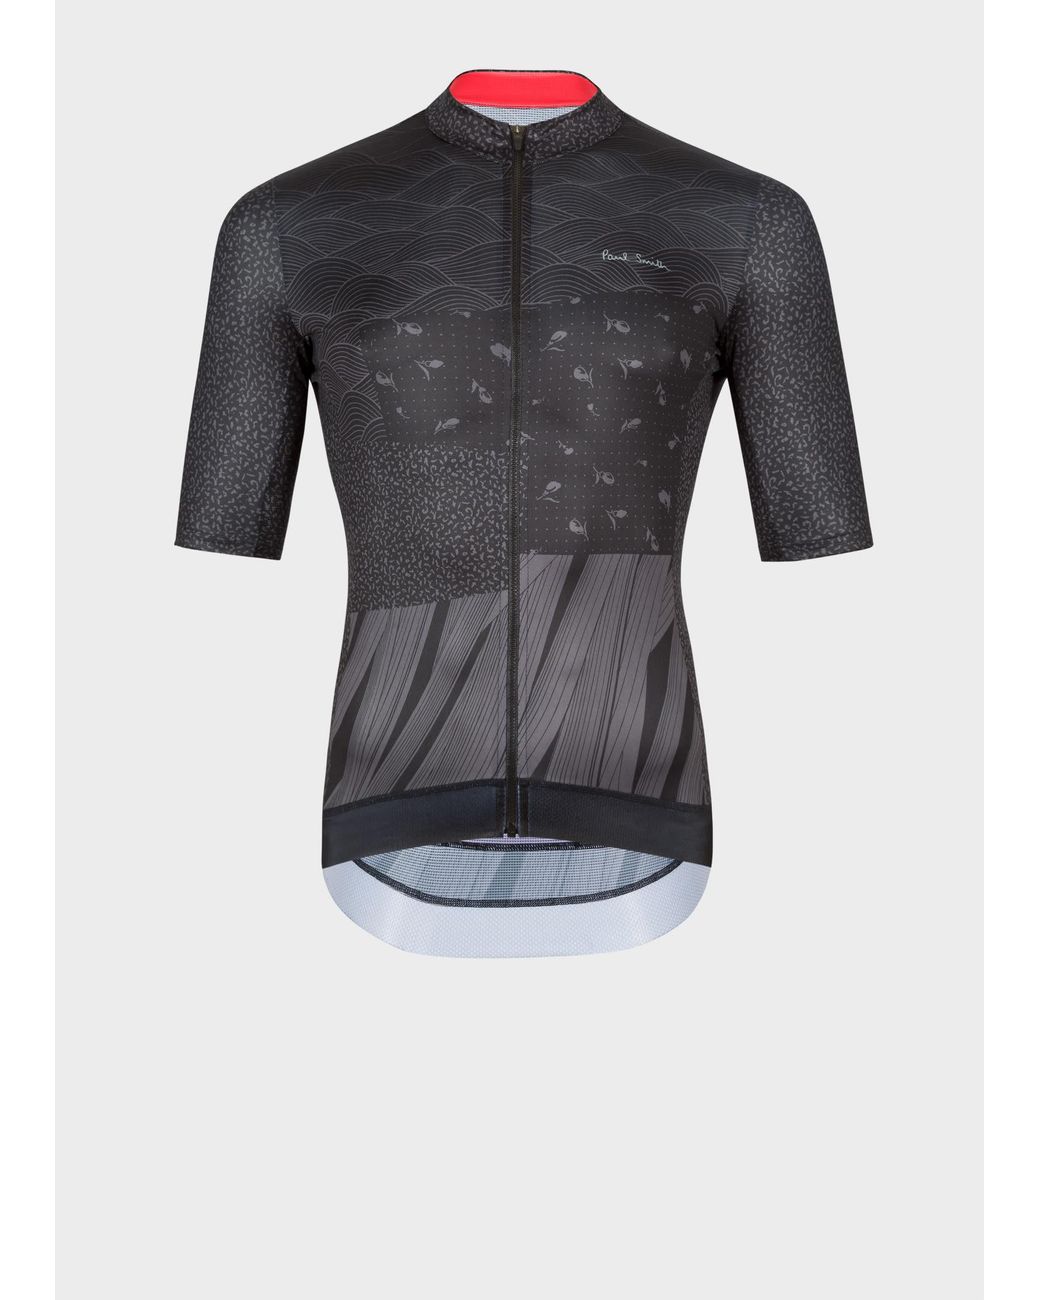 Paul Smith Synthetic Black Archive Print Cycling Jersey for Men - Lyst